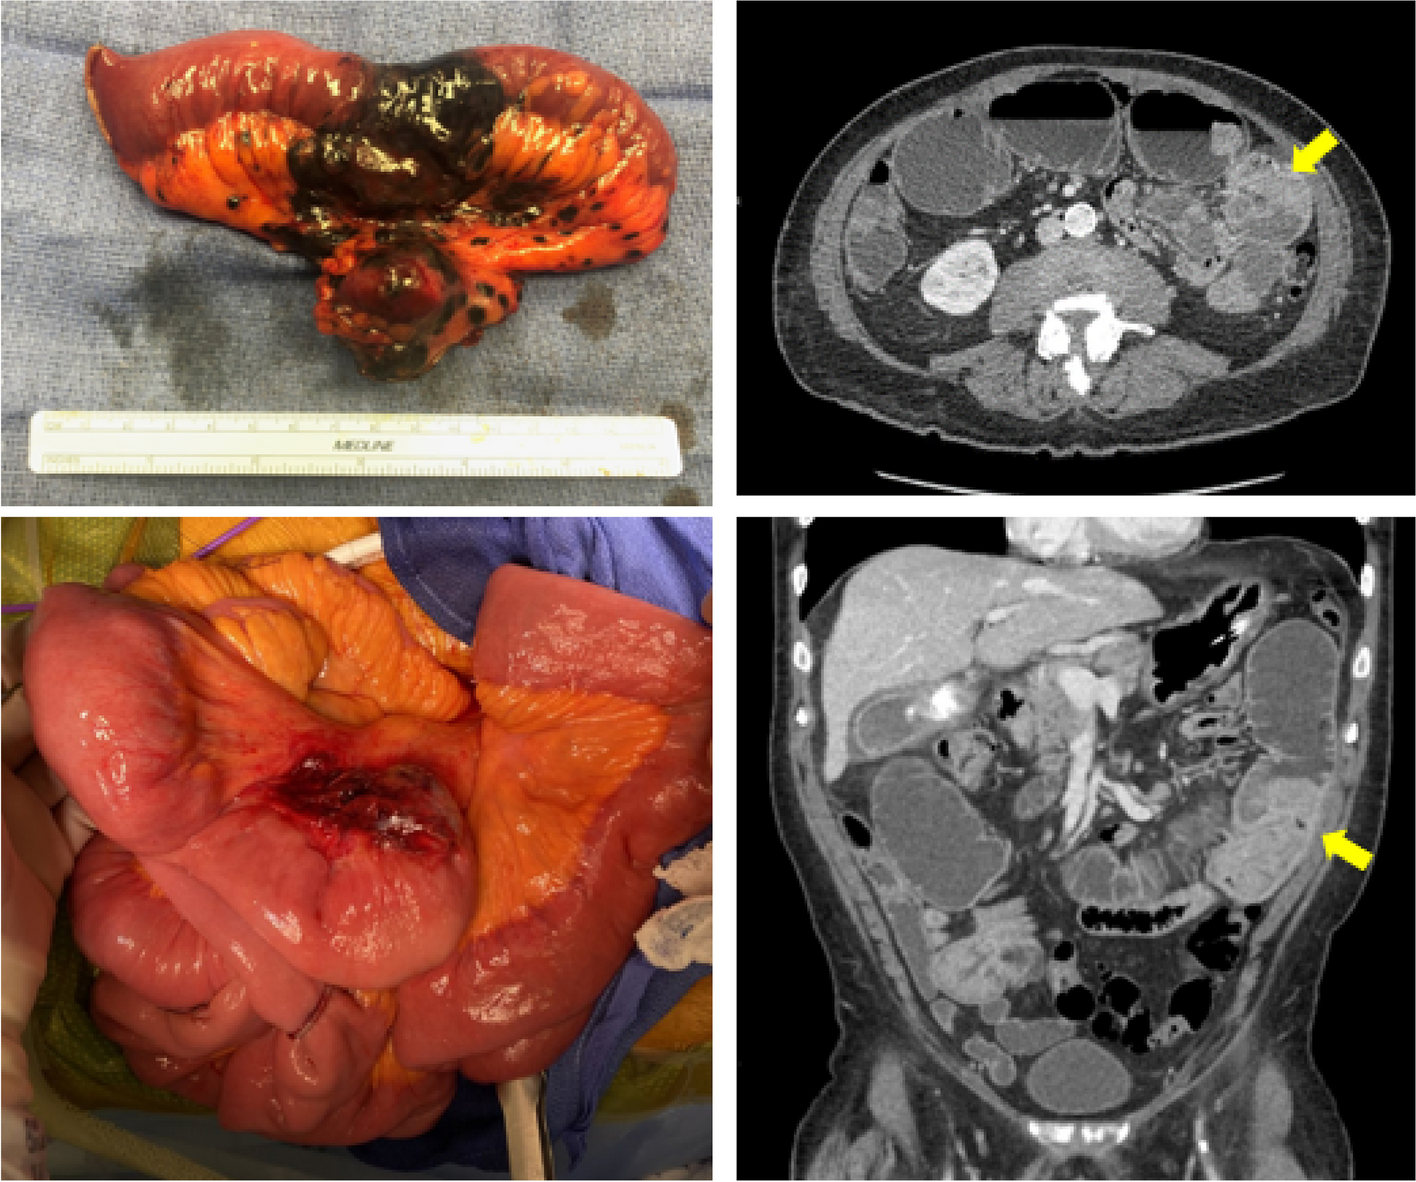 Metastatic melanoma to small bowel: metastasectomy is supported in the era of immunotherapy and checkpoint inhibitors